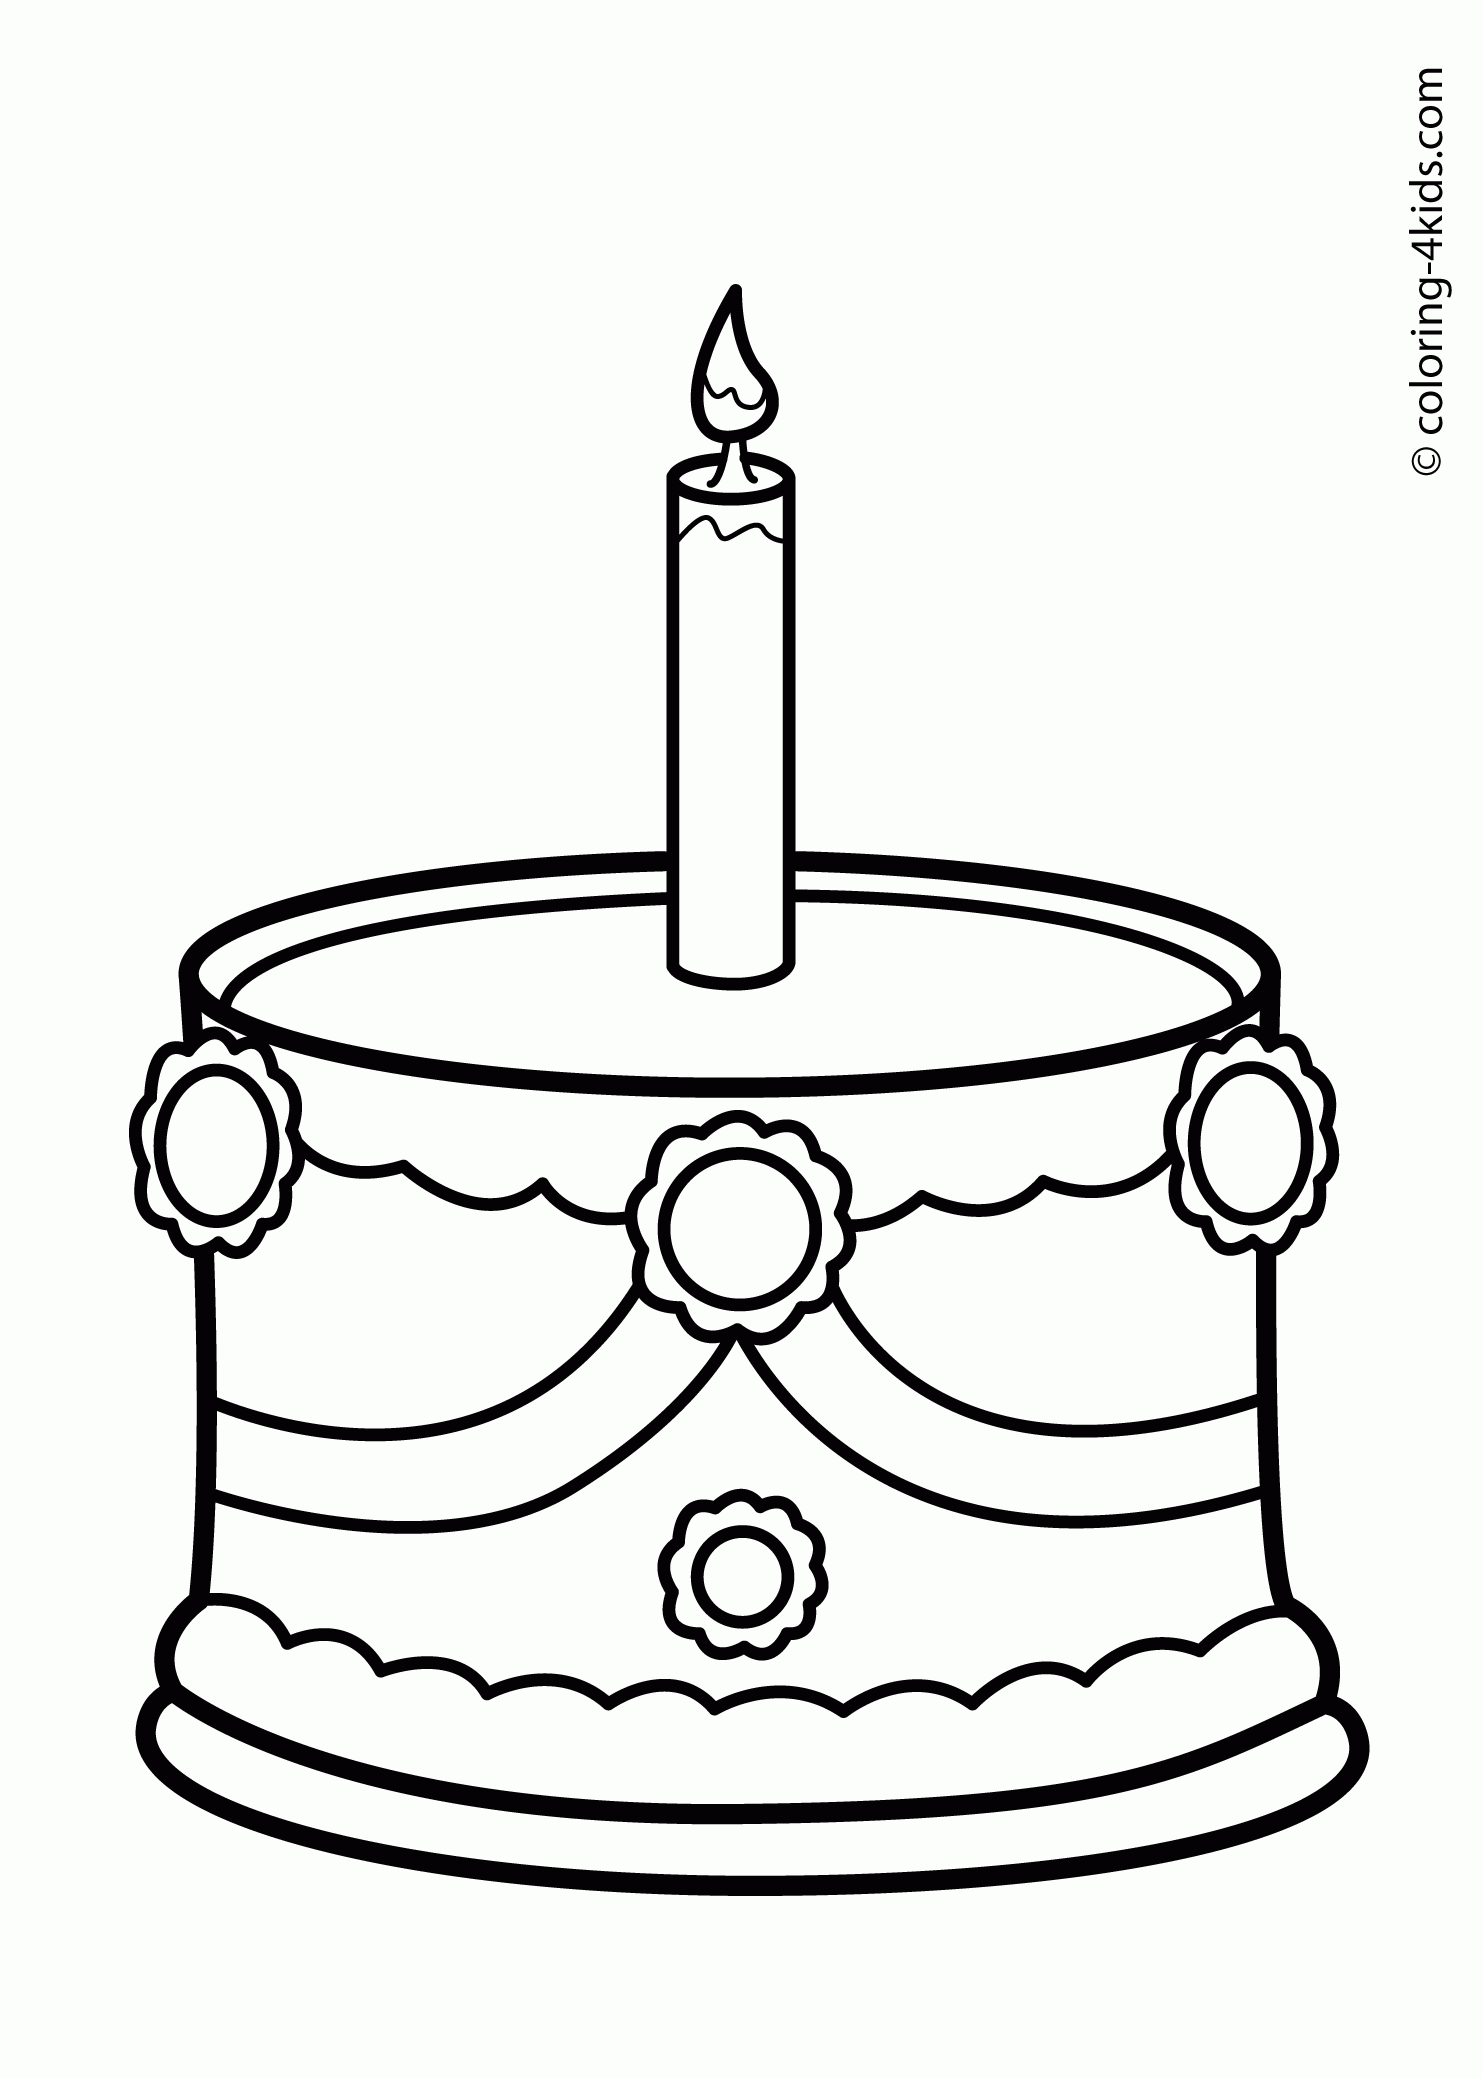 Cake Birthday Party Coloring Pages - Birthday Cake avec Gateau Coloriage 